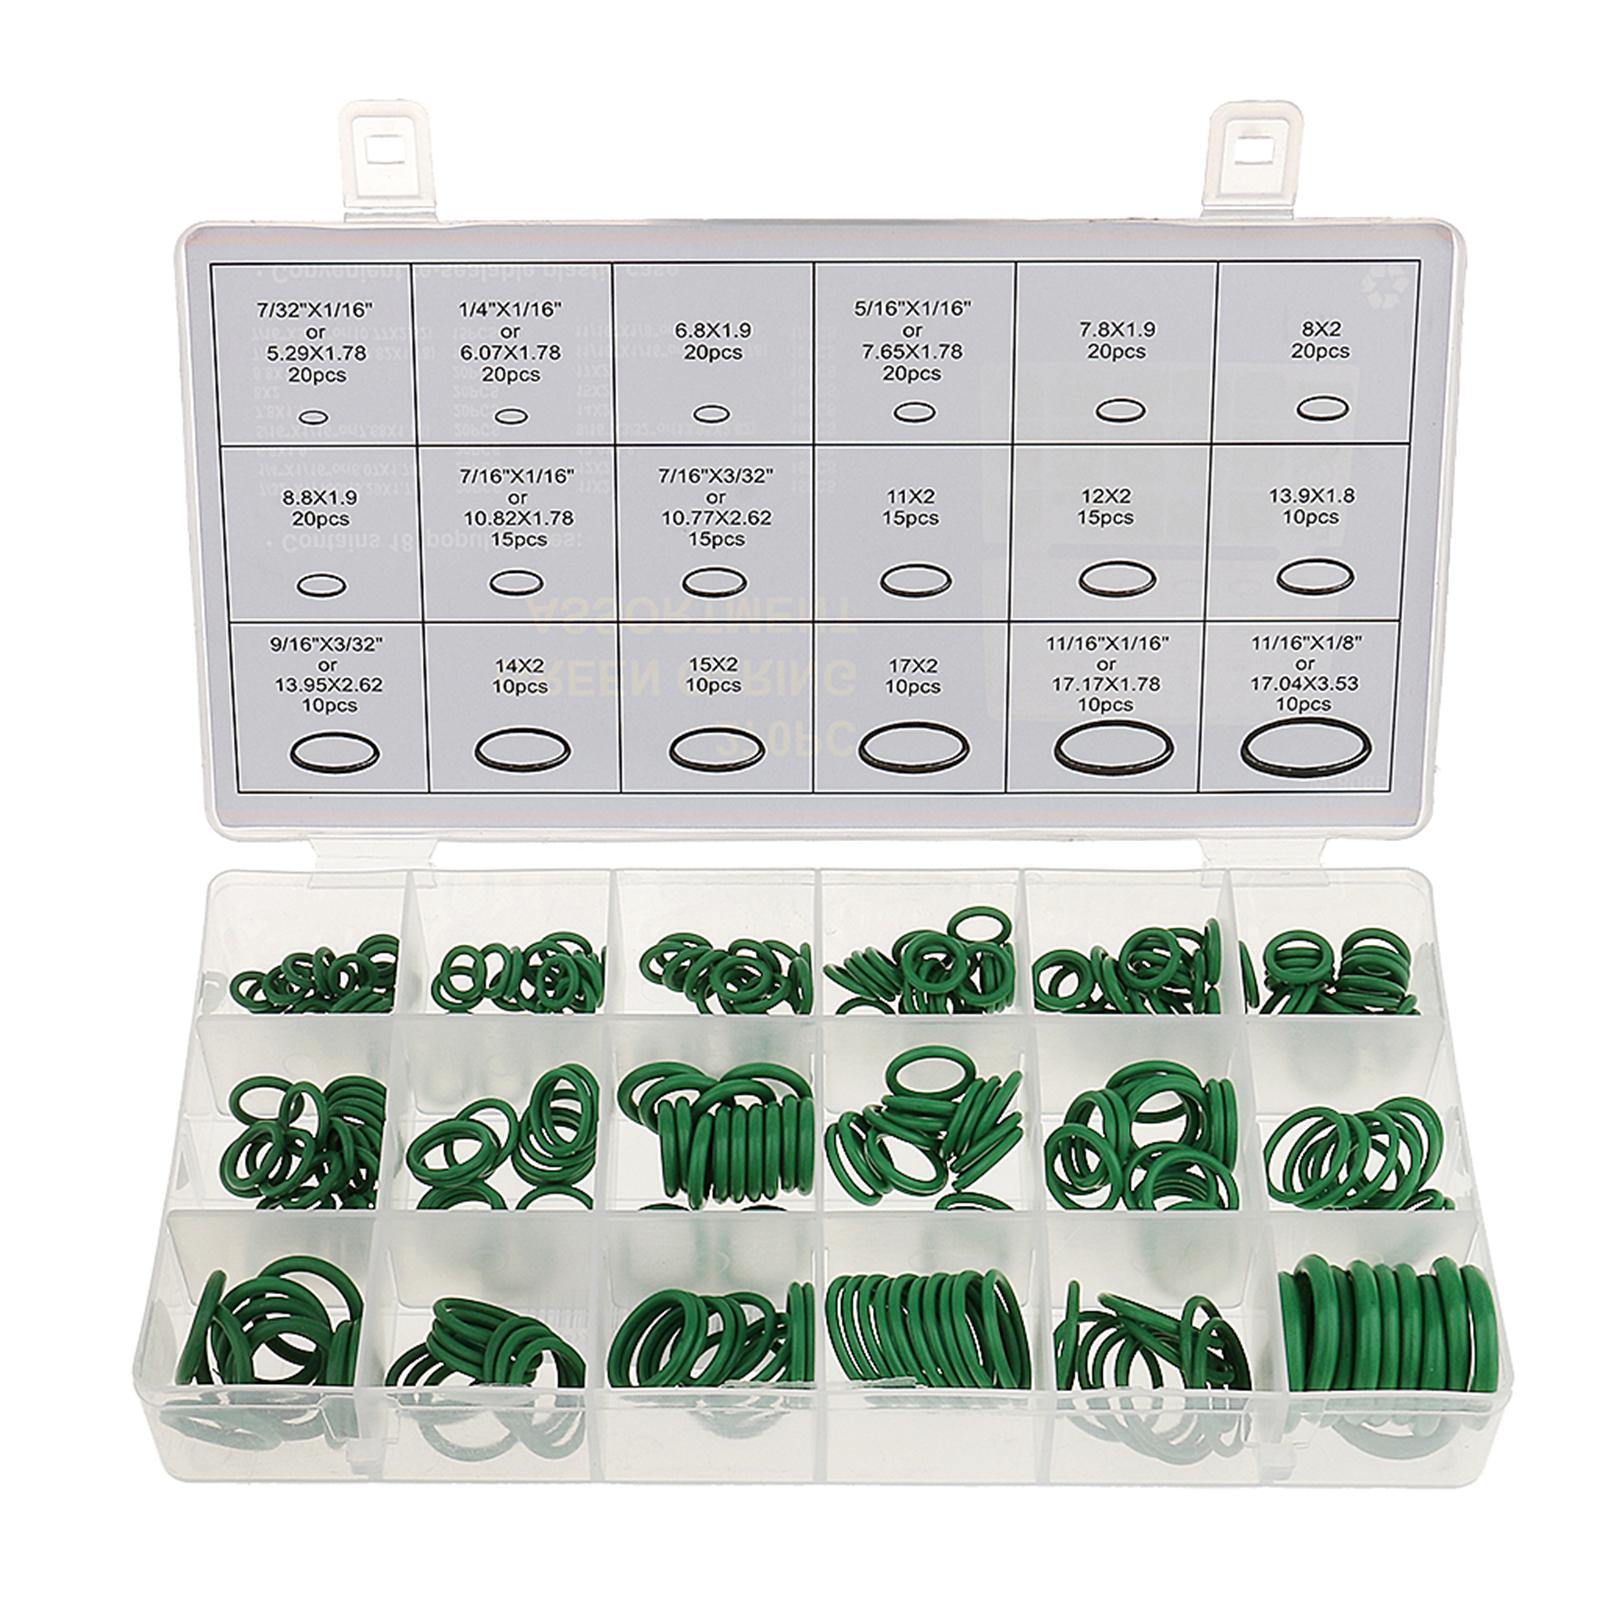 270 Pieces Car Air Conditioning A/C System HNBR O-Ring Assortment Kit Green